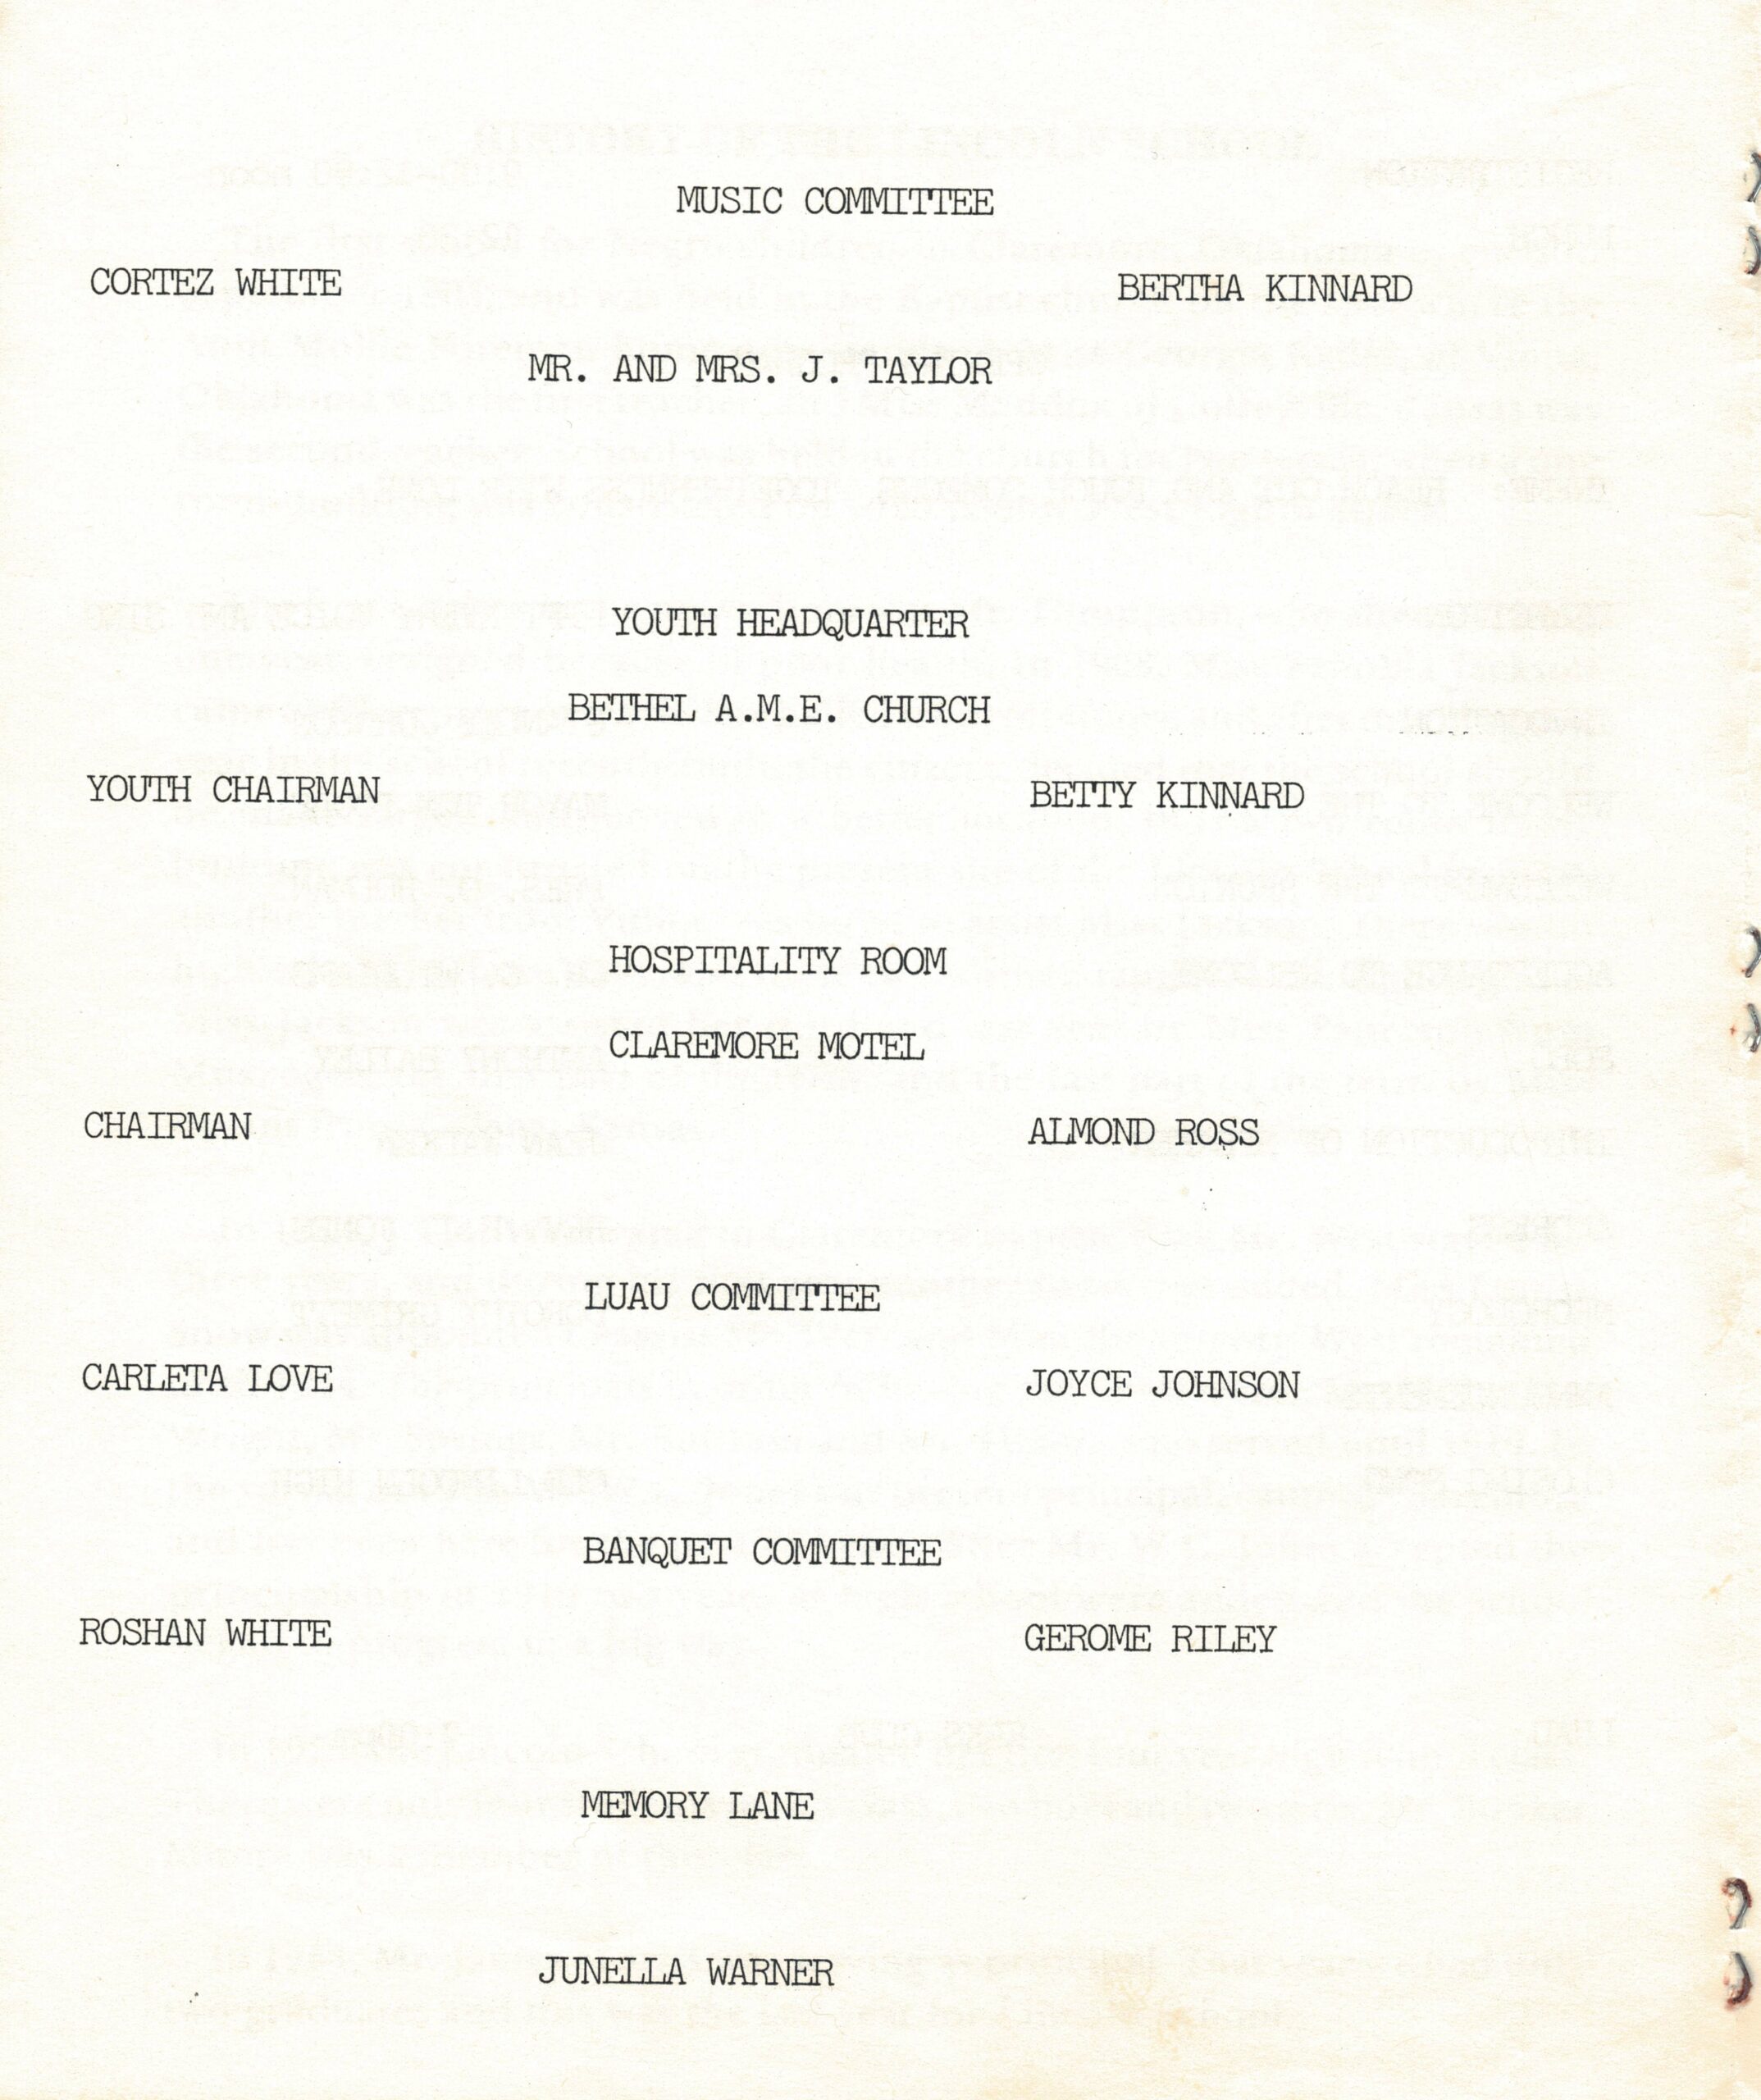 Second page of the 1991 Lincoln student reunion pamphlet detailing committees and members.